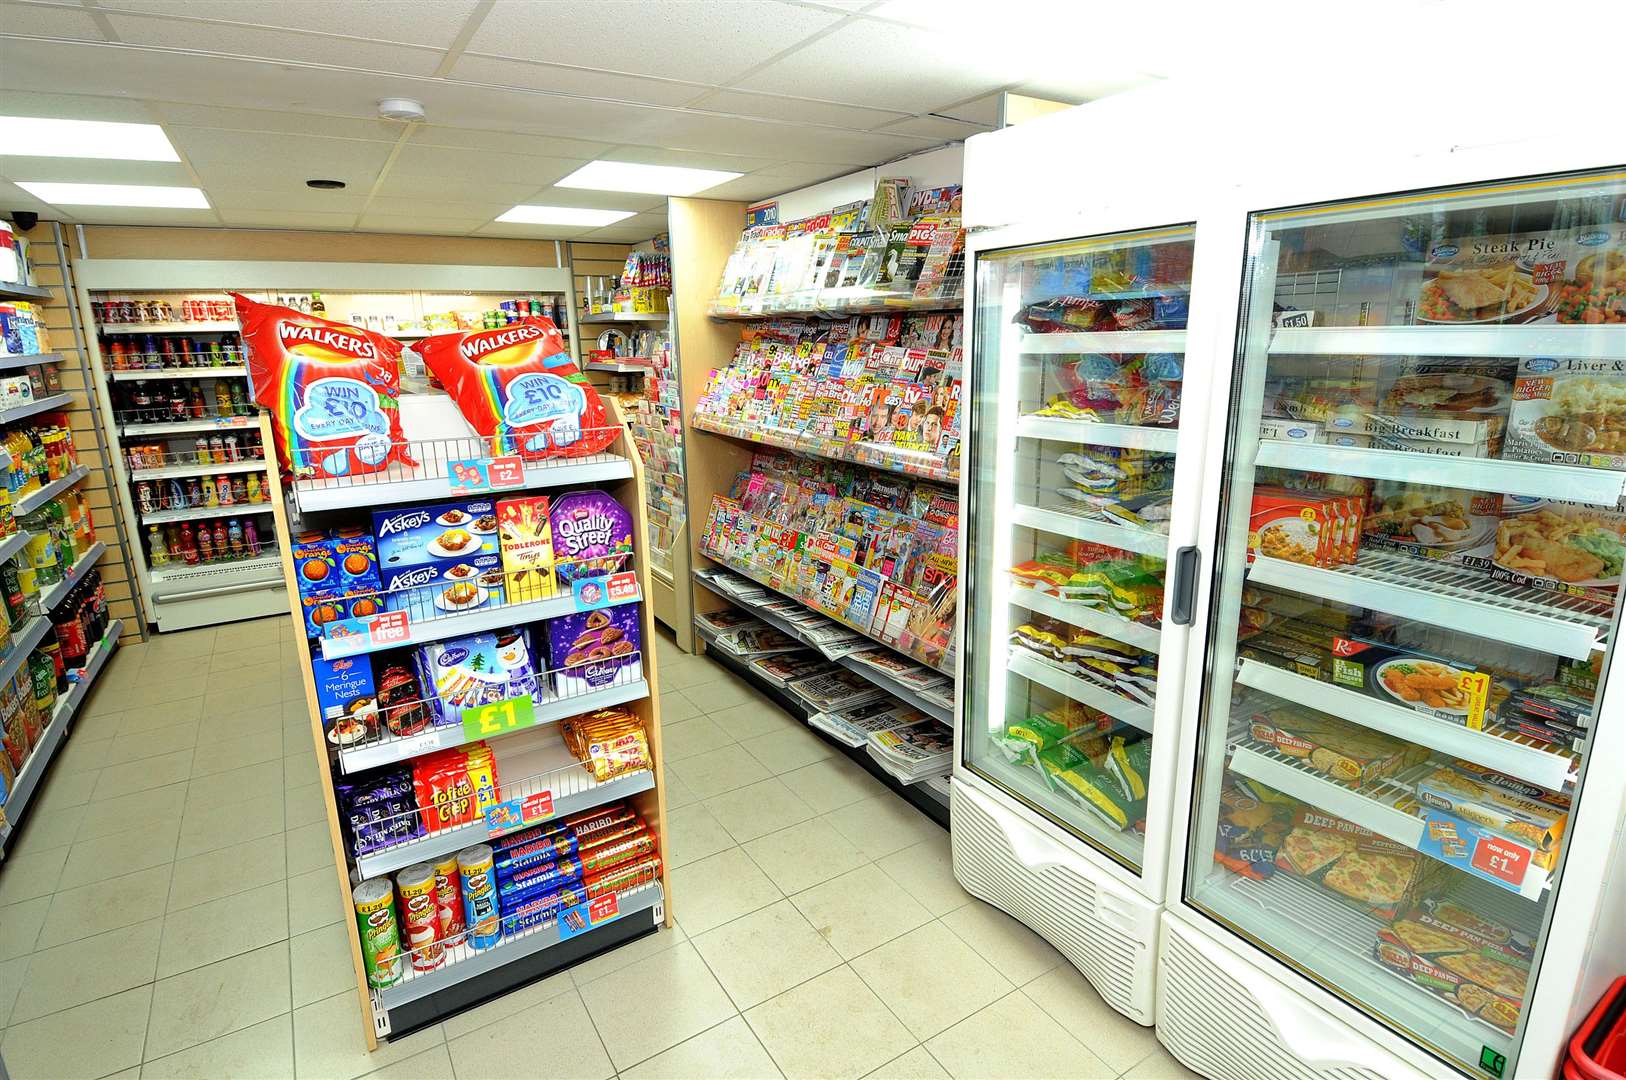 Village stores can secure national recognition in the awards